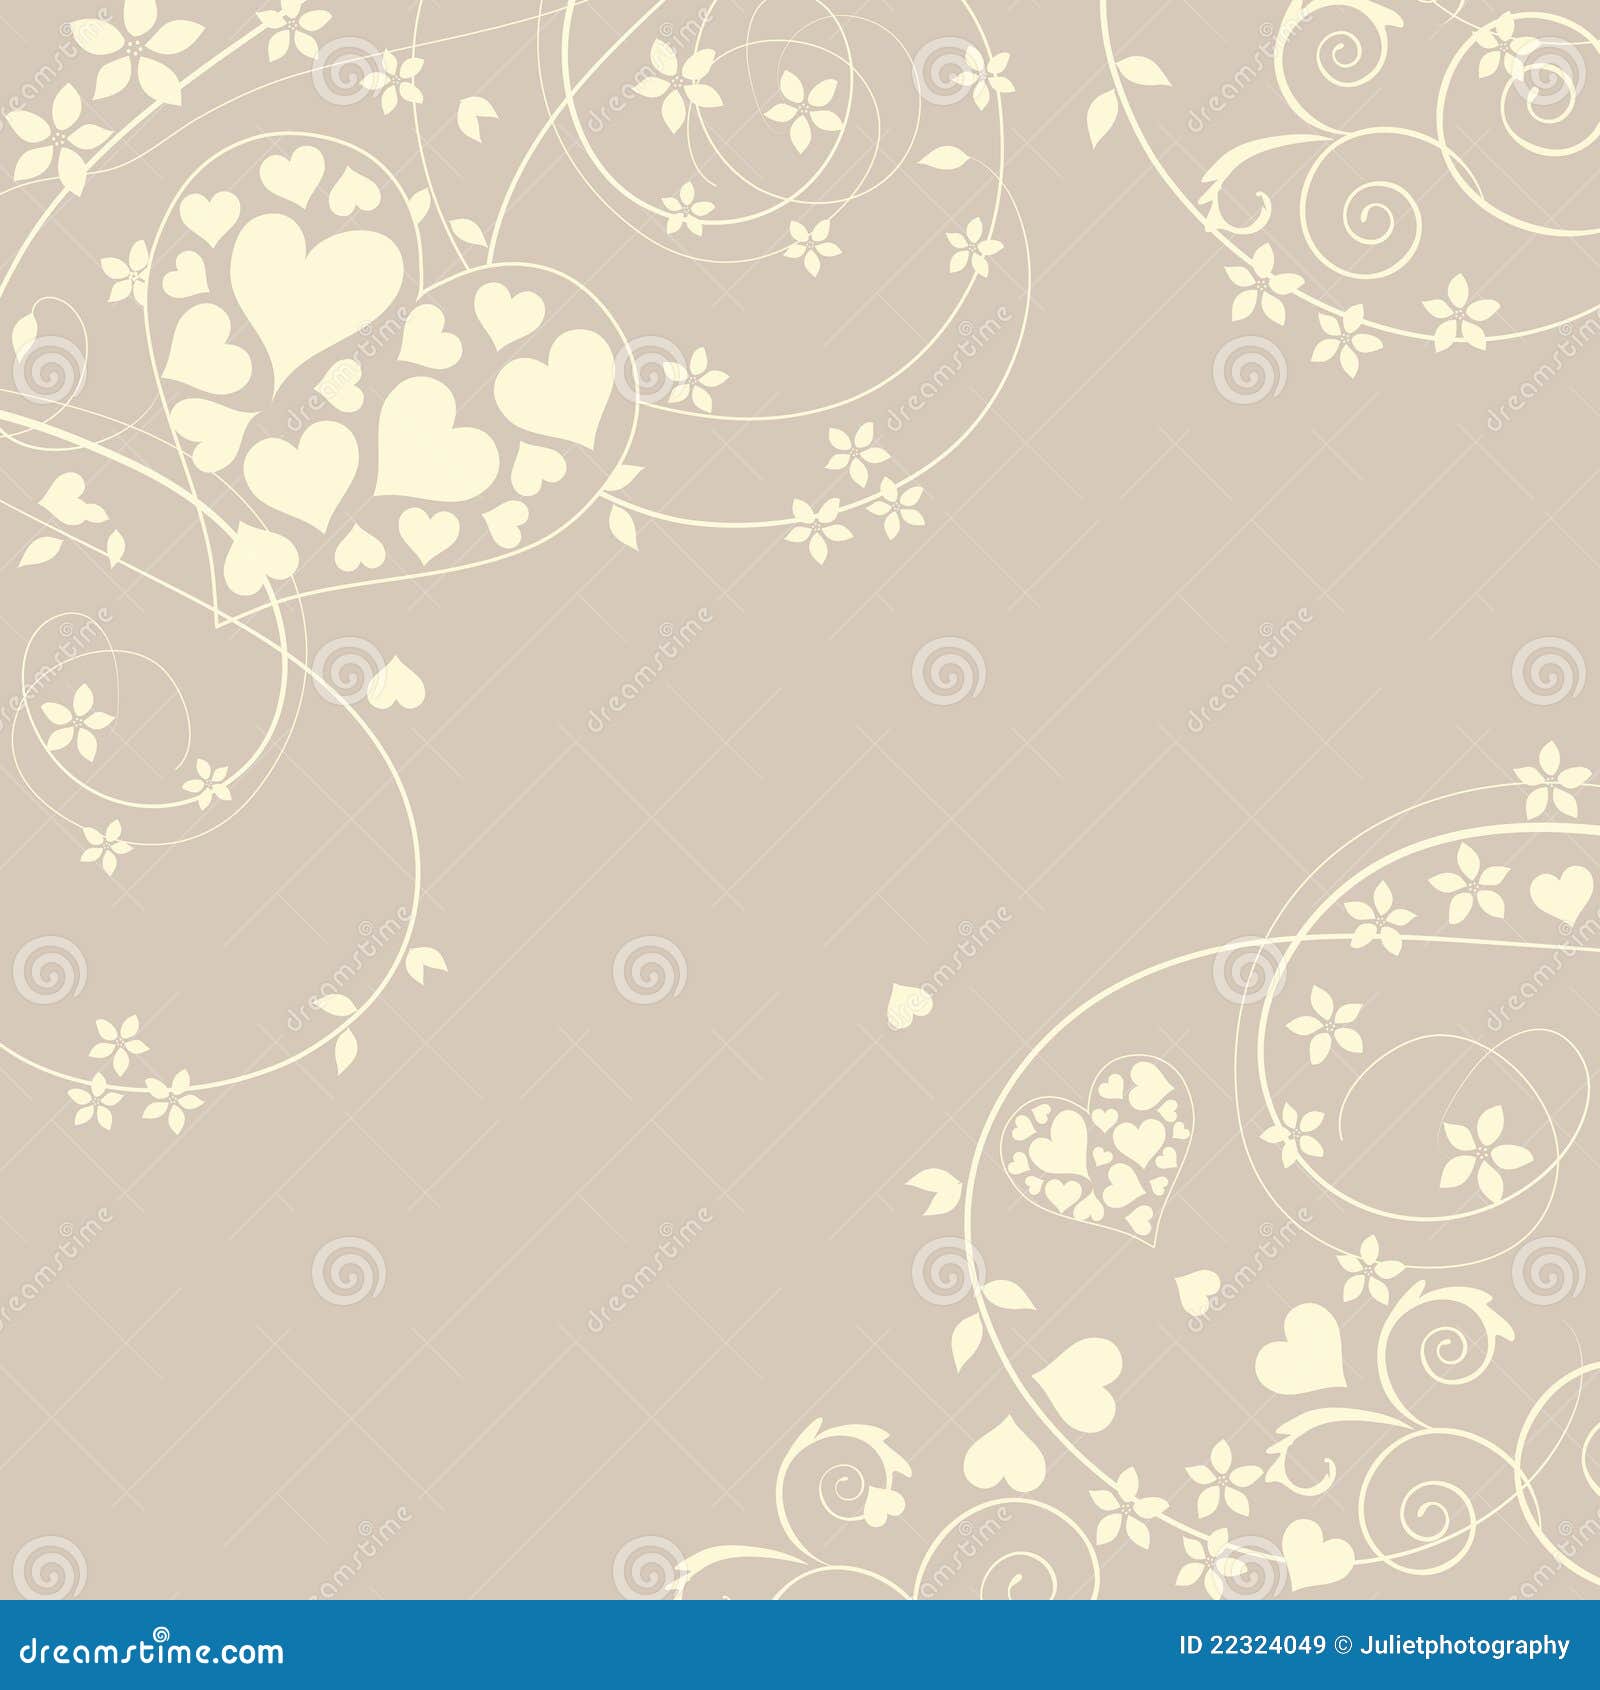 soft and pretty love background with swirls